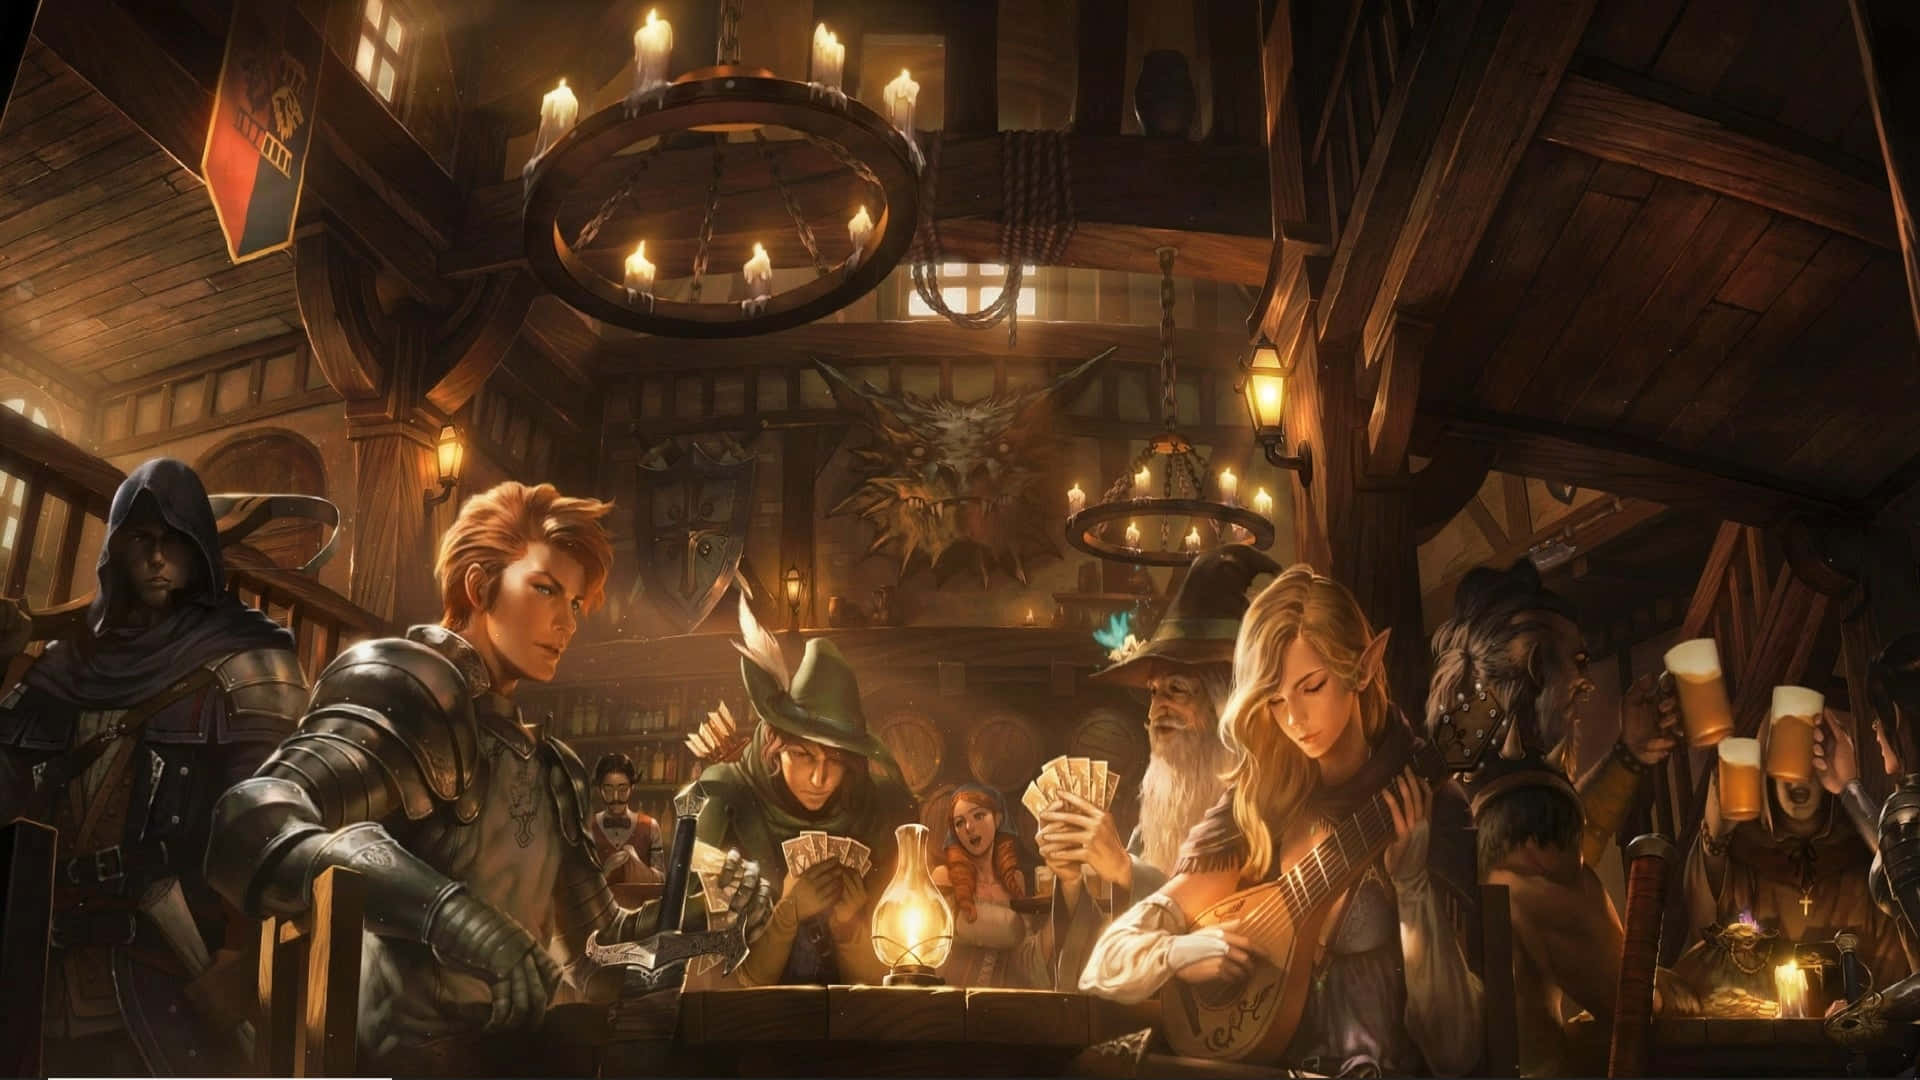 Enjoy a leisurely drinking experience at the traditional tavern.